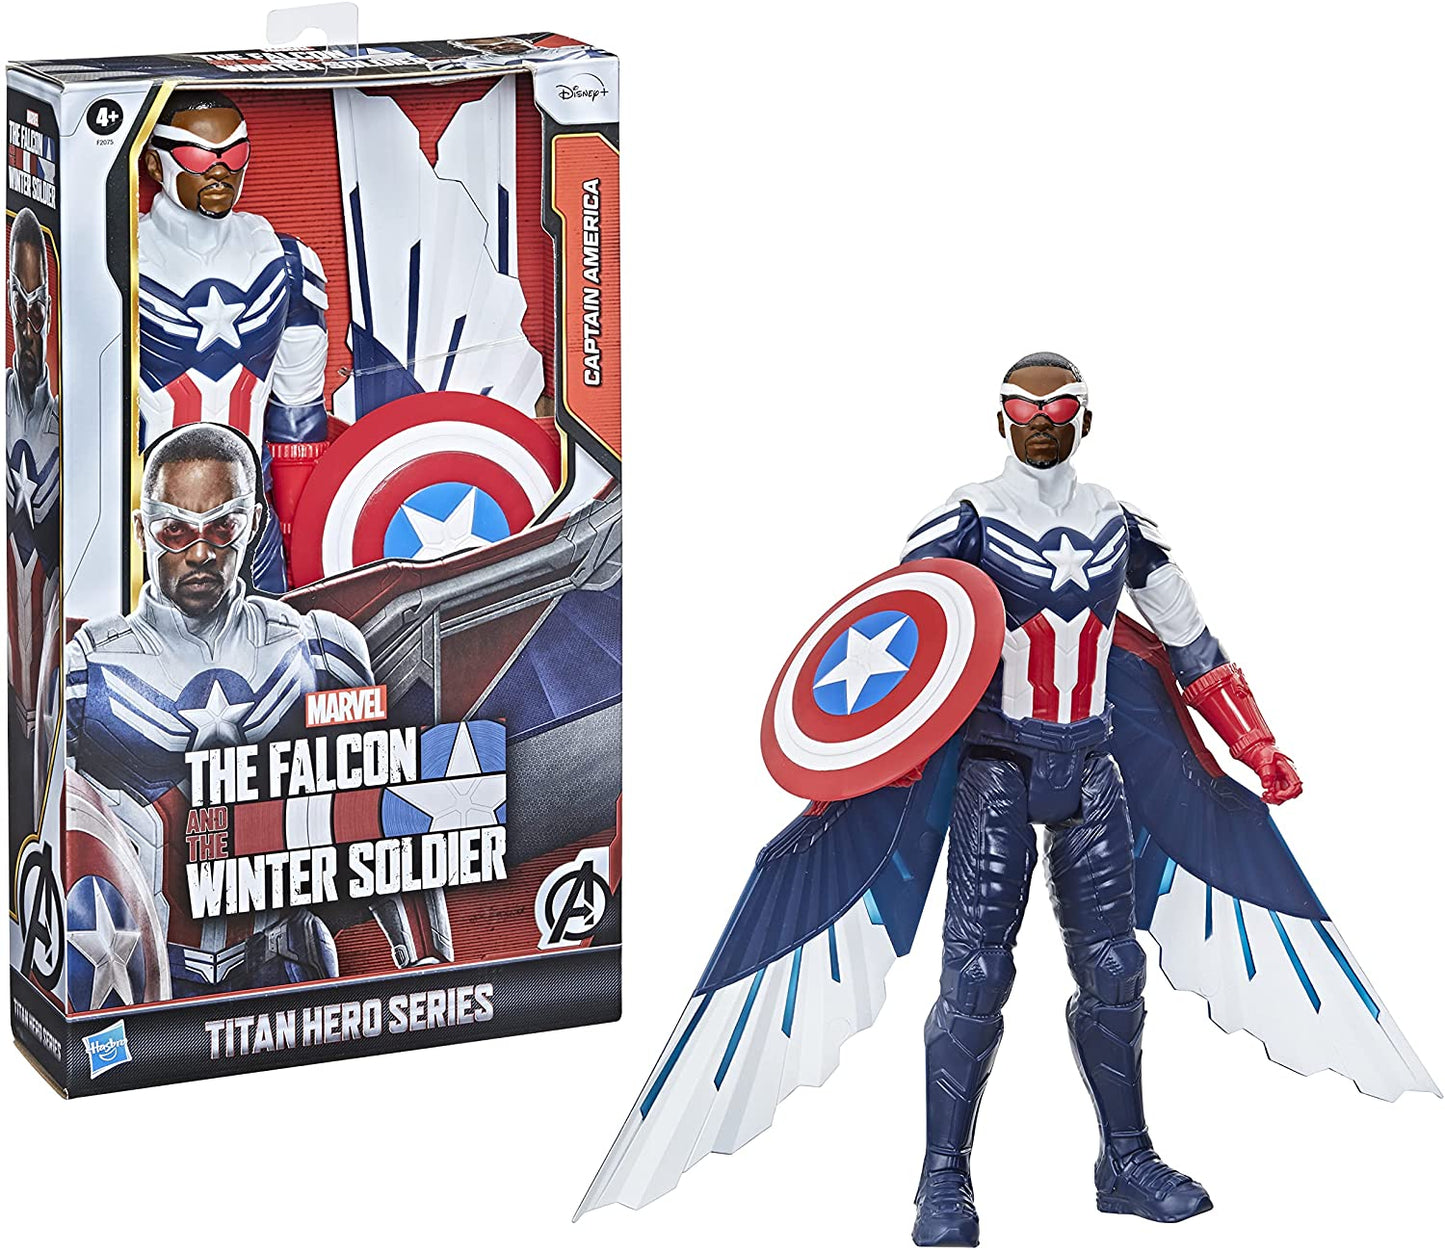 Avengers Marvel Studios Titan Hero Series Captain America Action Figure, 12-Inch Toy, Includes Wings, for Kids Ages 4 and Up